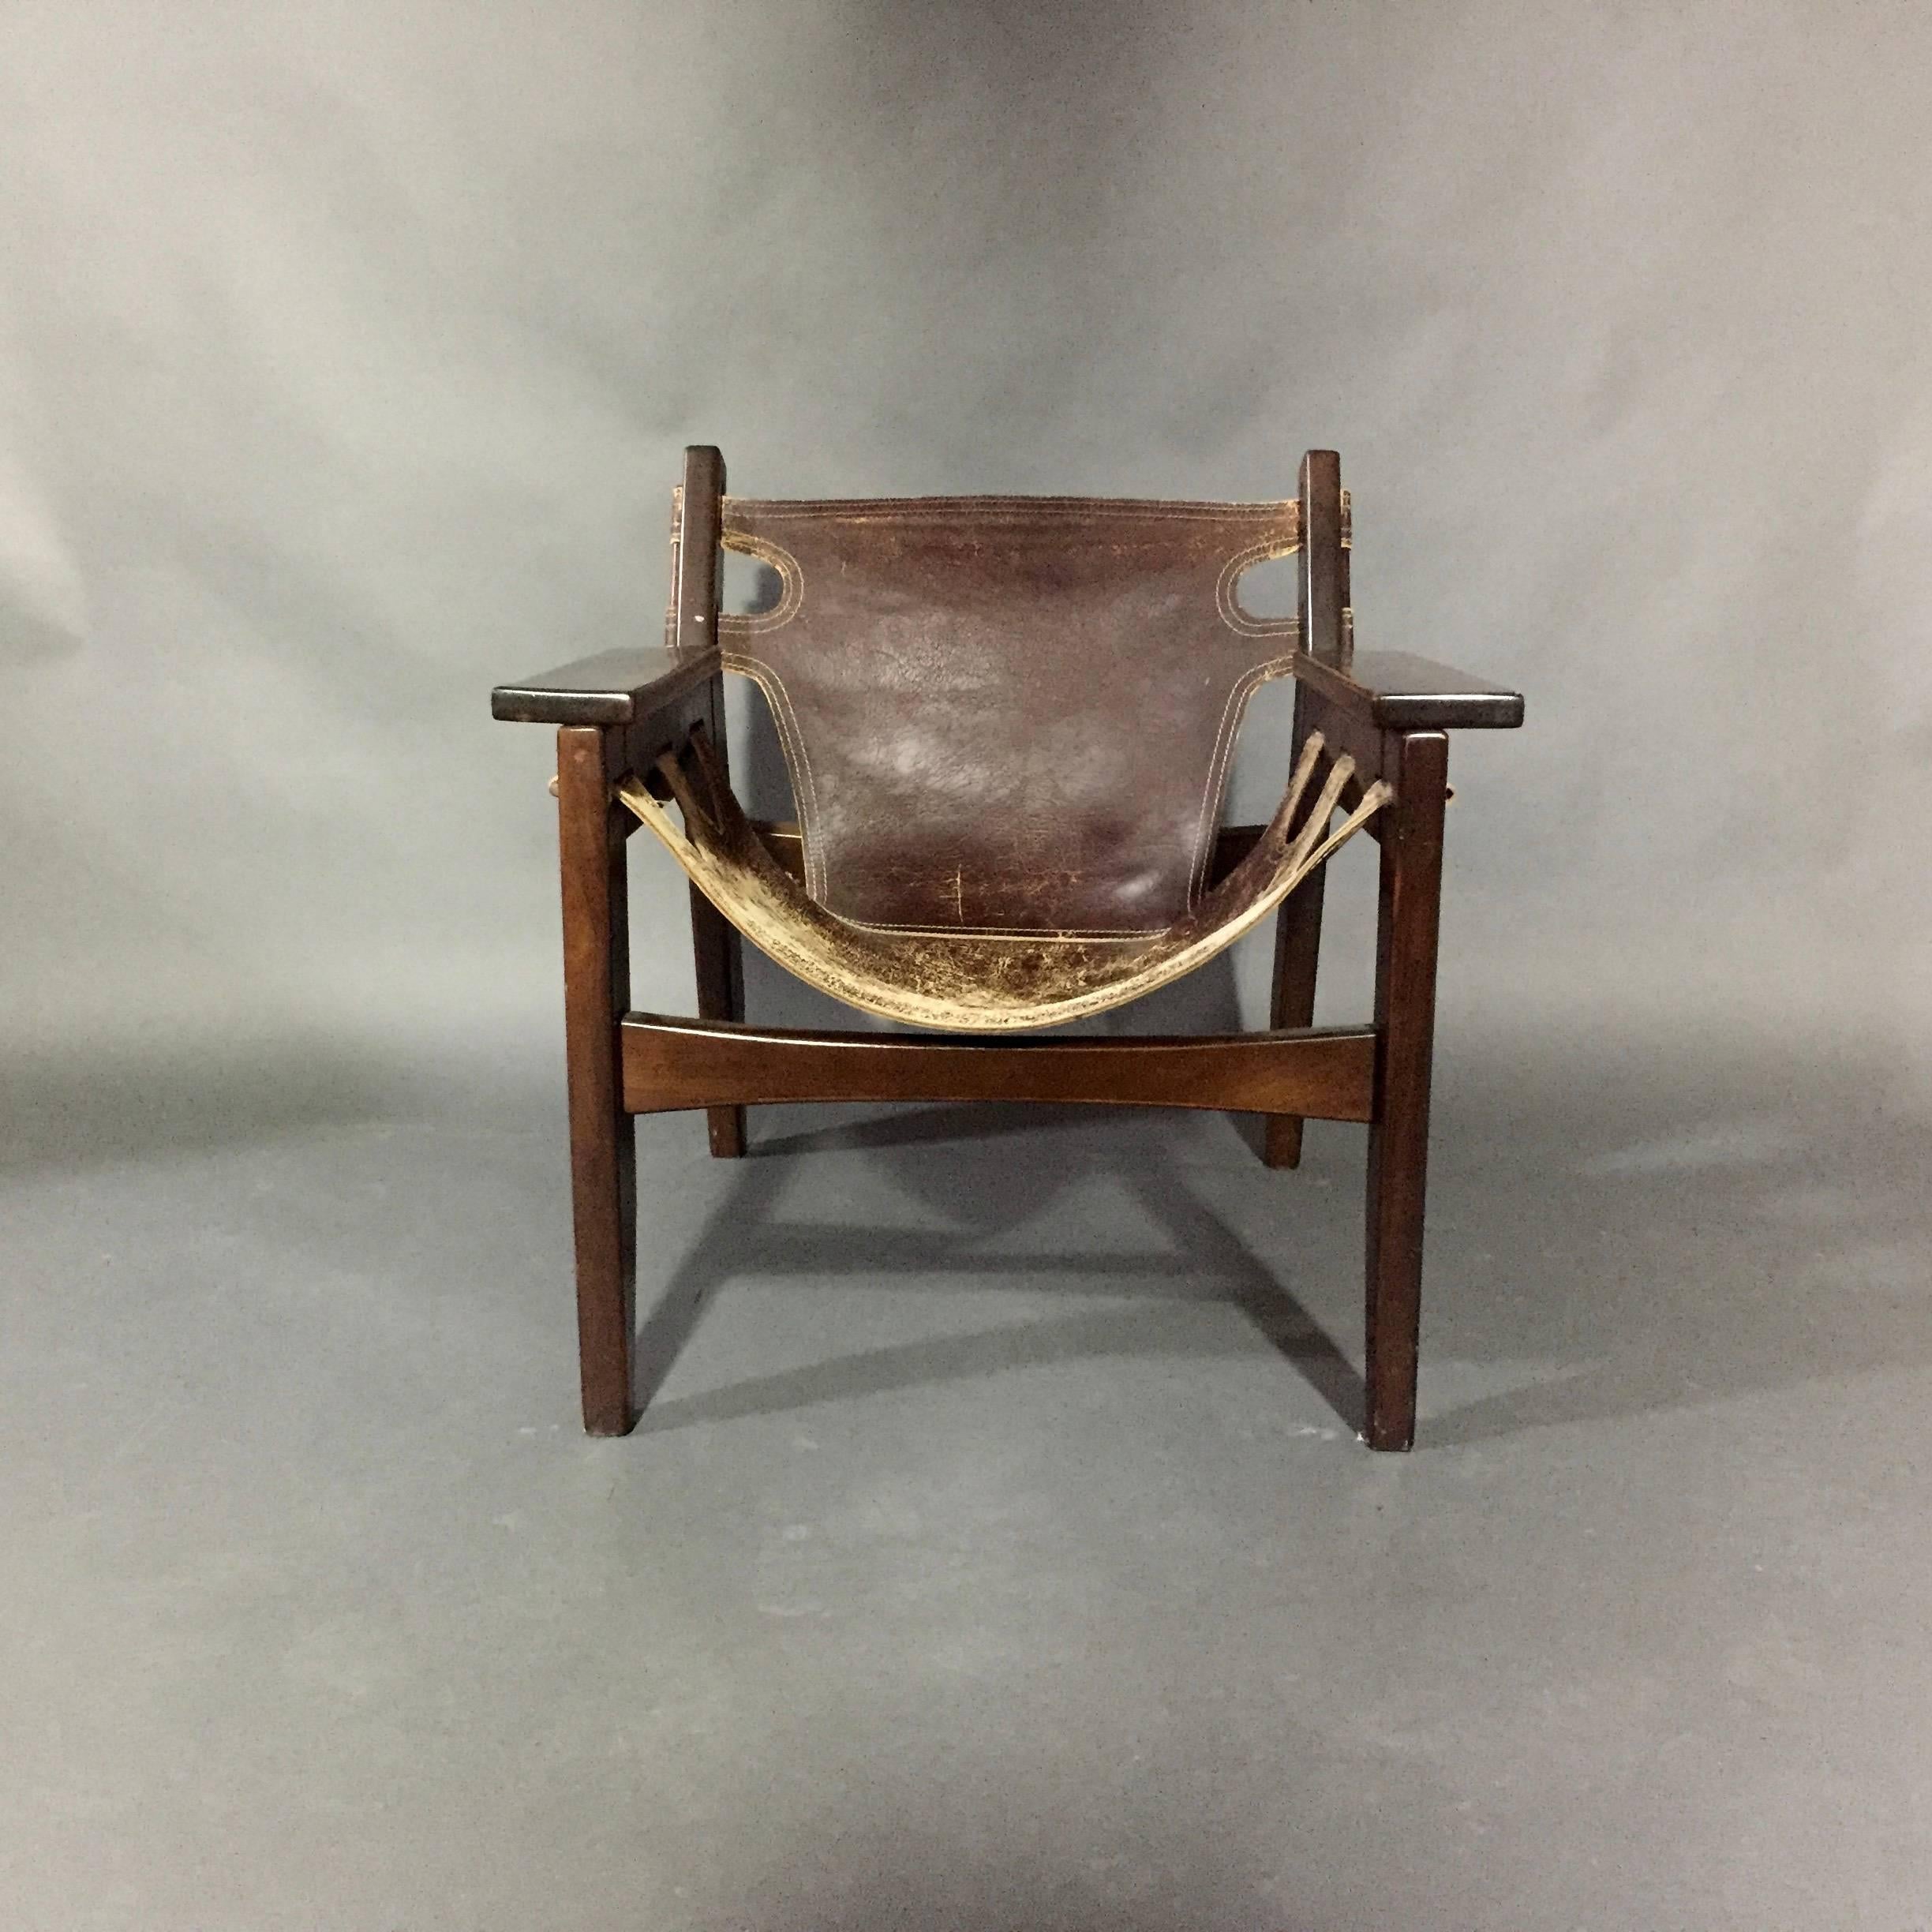 Mid-Century Modern Sergio Rodrigues Kilin Lounge Chair, Rosewood and Leather, Brazil